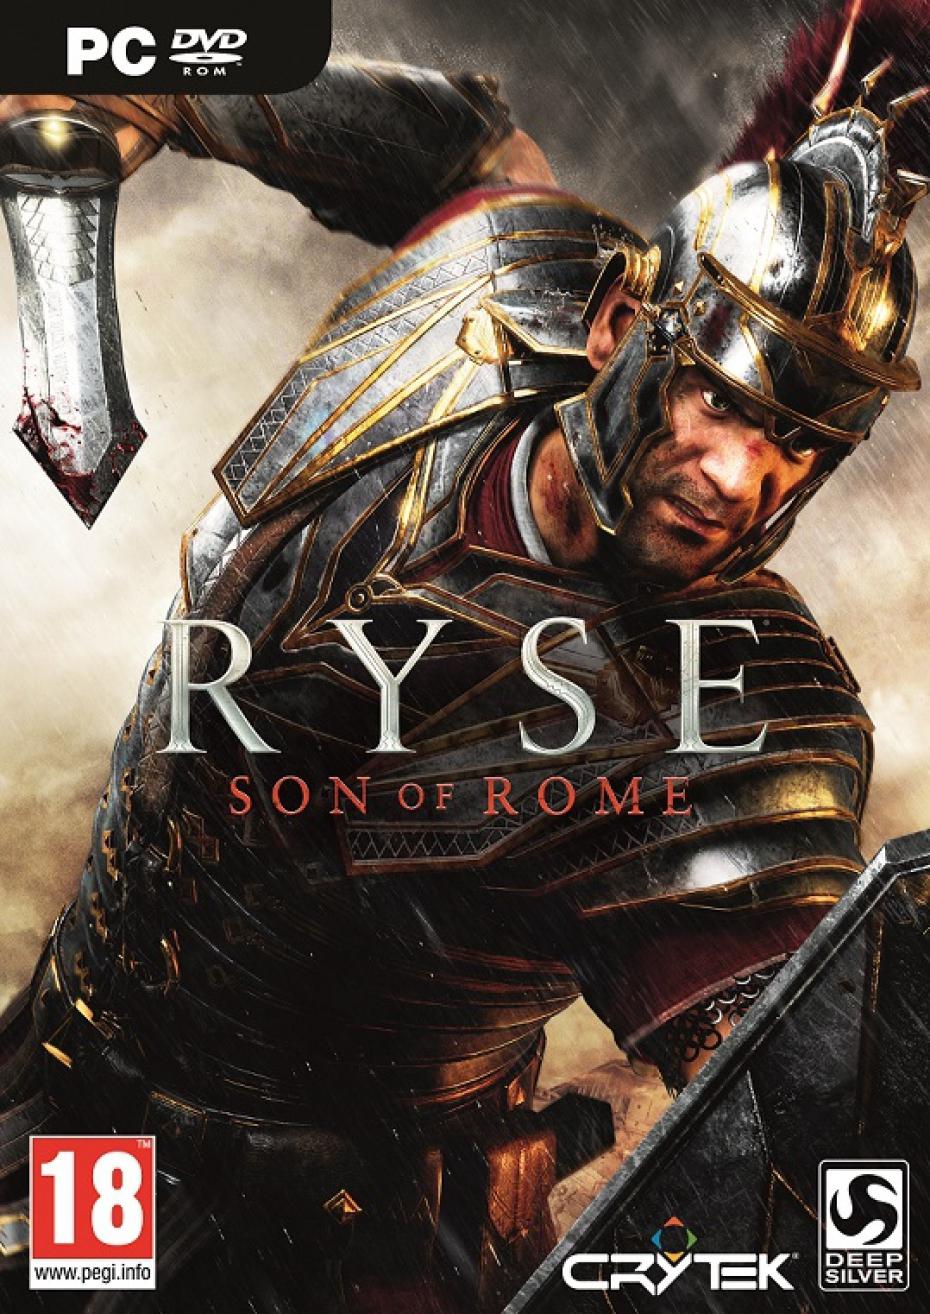 Ryse Son of Rome PC Game Download Full Version -Full Free Games Full ...